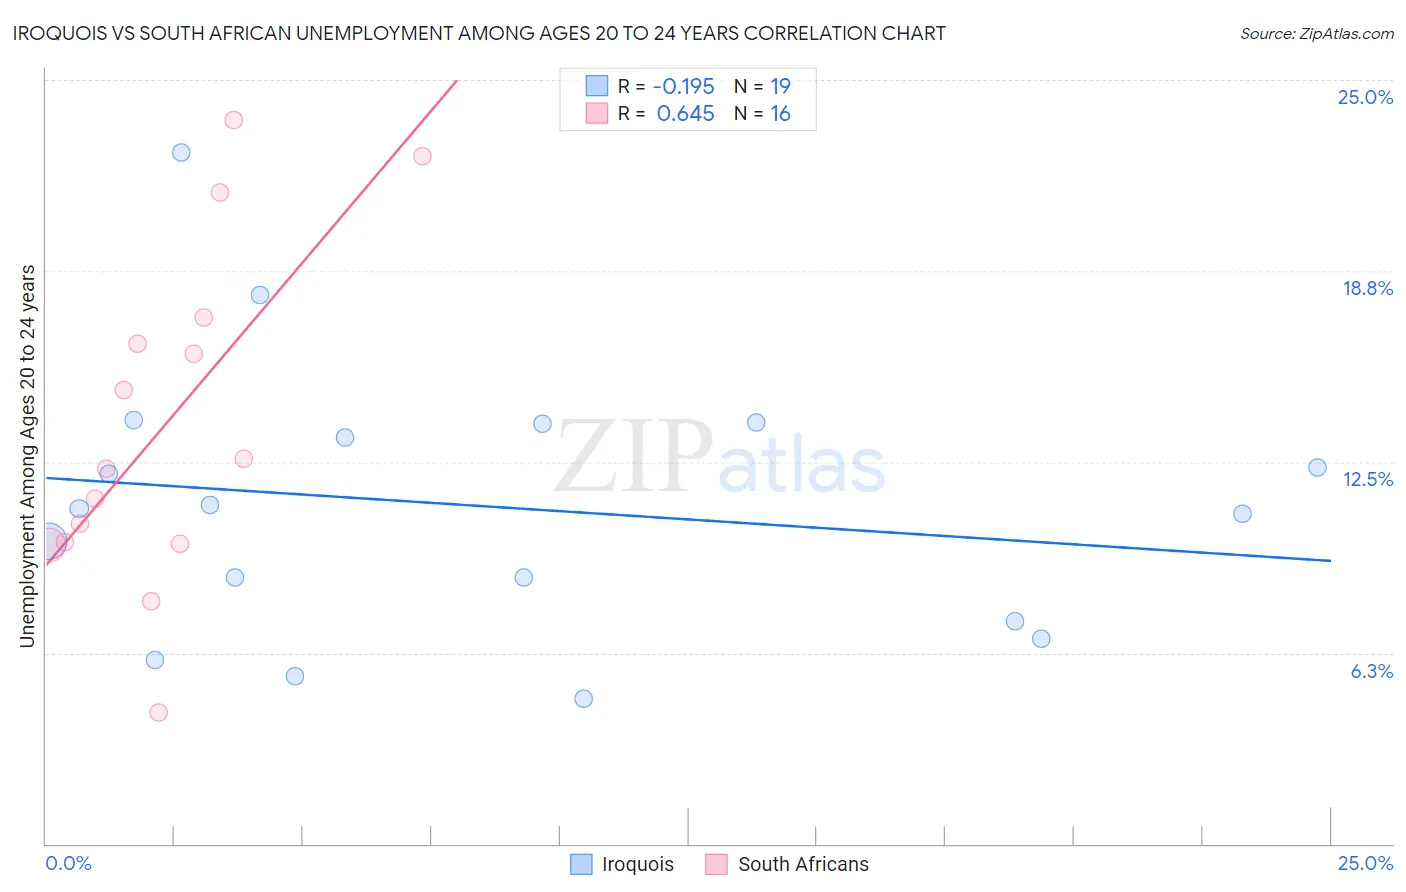 Iroquois vs South African Unemployment Among Ages 20 to 24 years